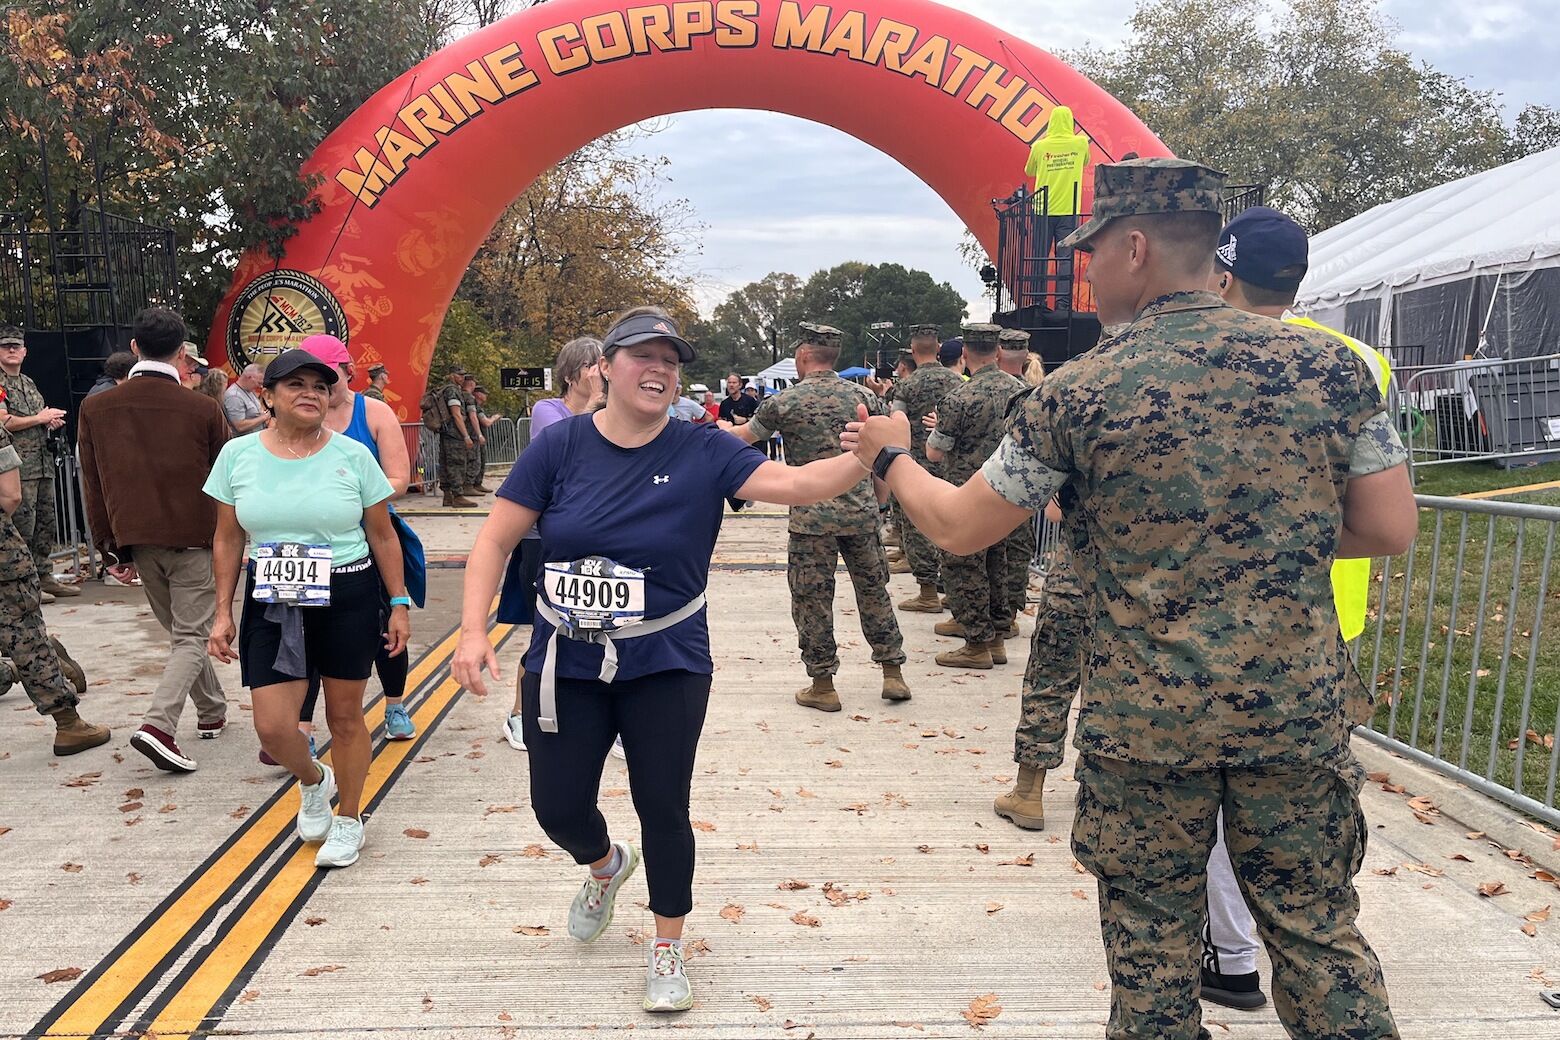 Marine Corps Marathon closing early due to humid weather